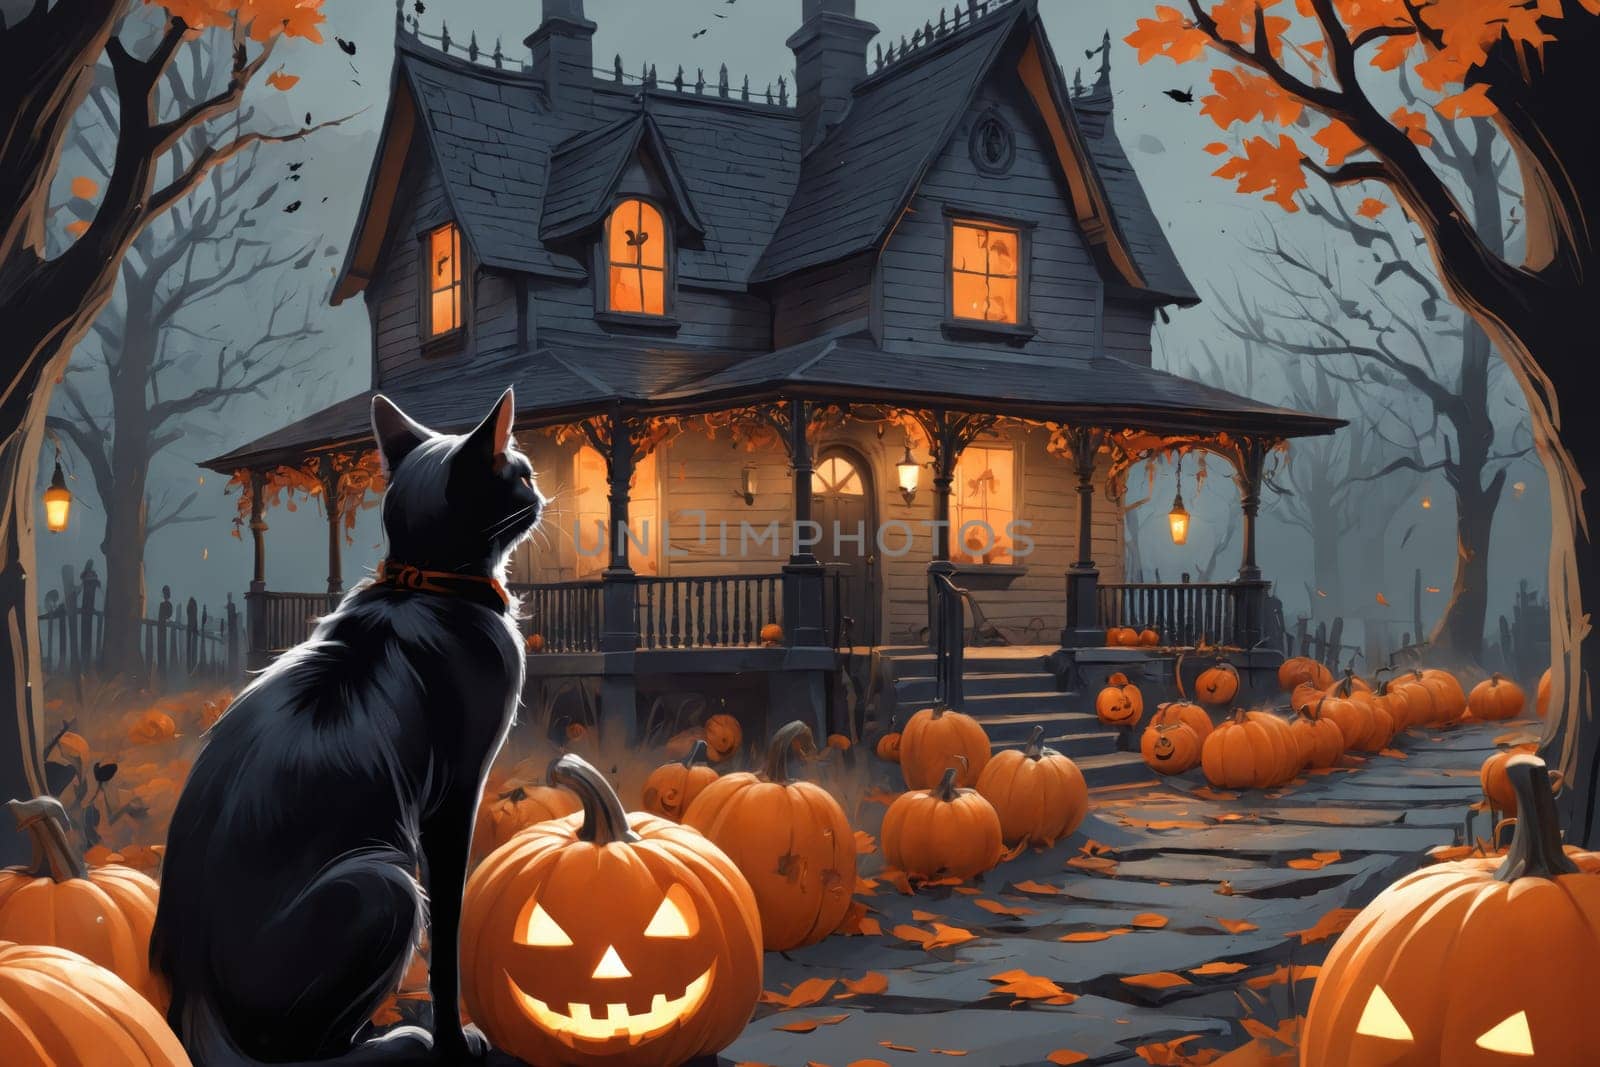 'Basking in the Halloween Spirit: Celebrations at the Haunted House'. by Andre1ns